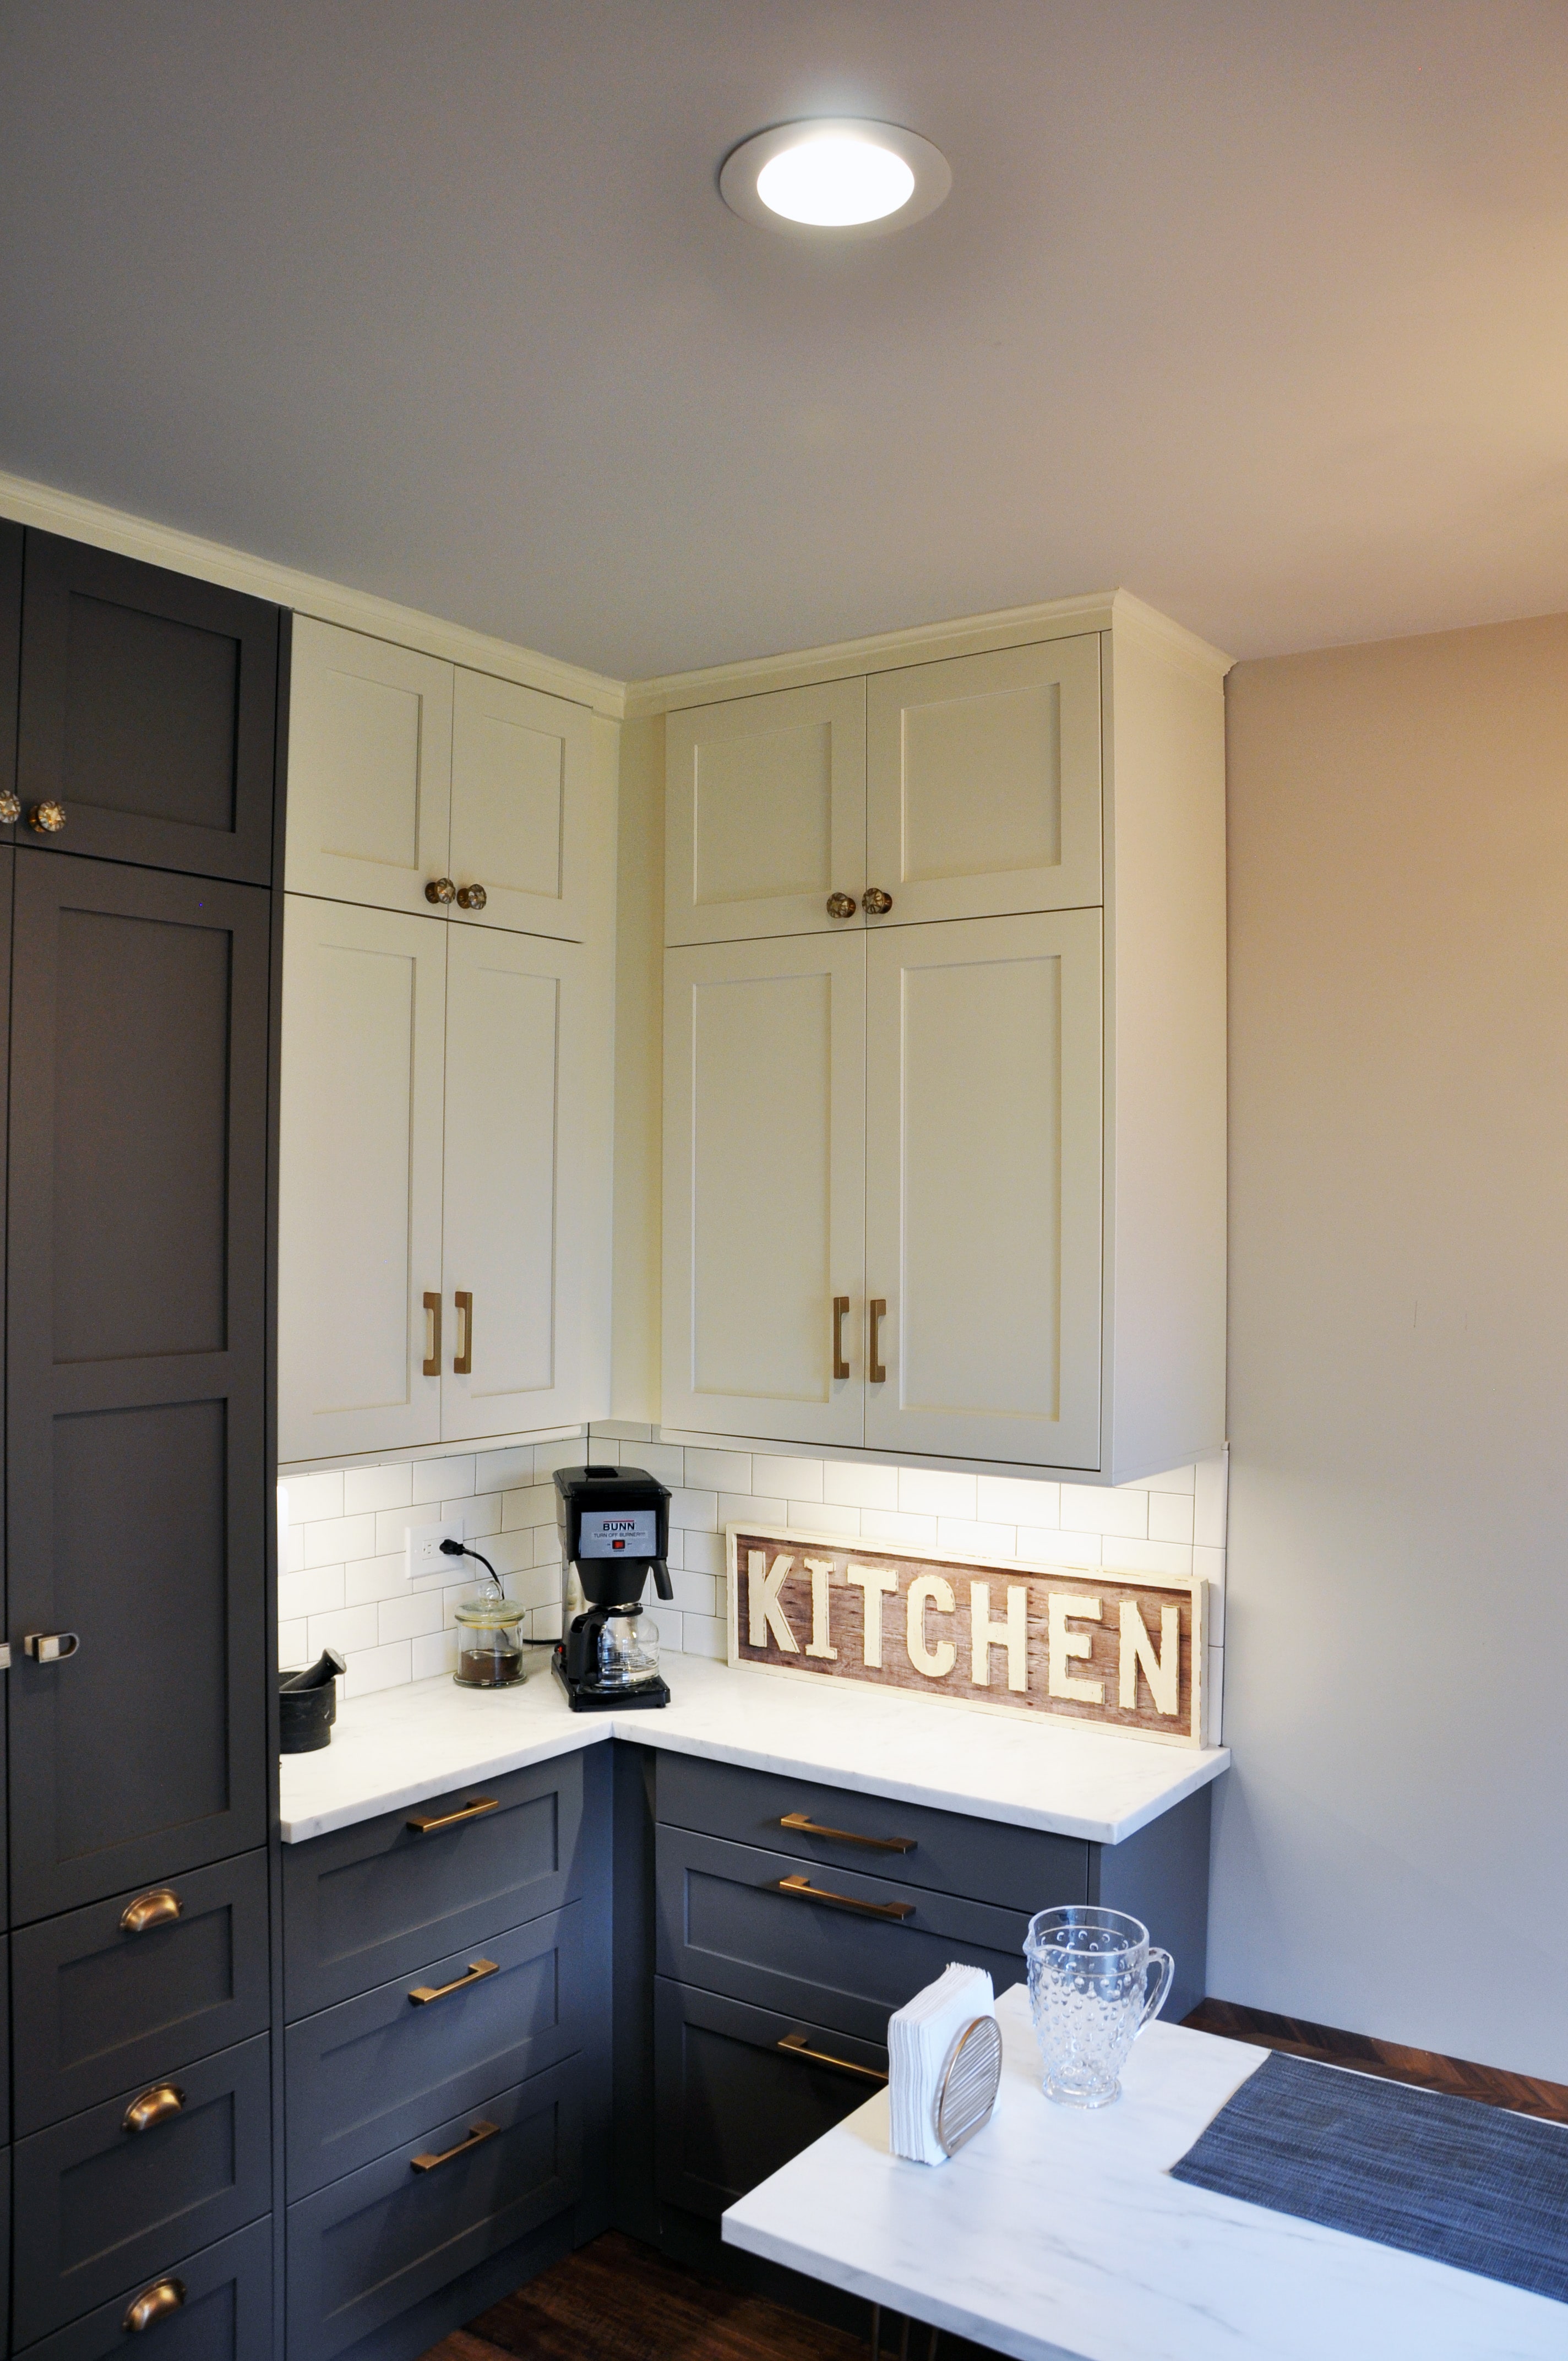 ahoy! an ikea kitchen with a true shaker style door